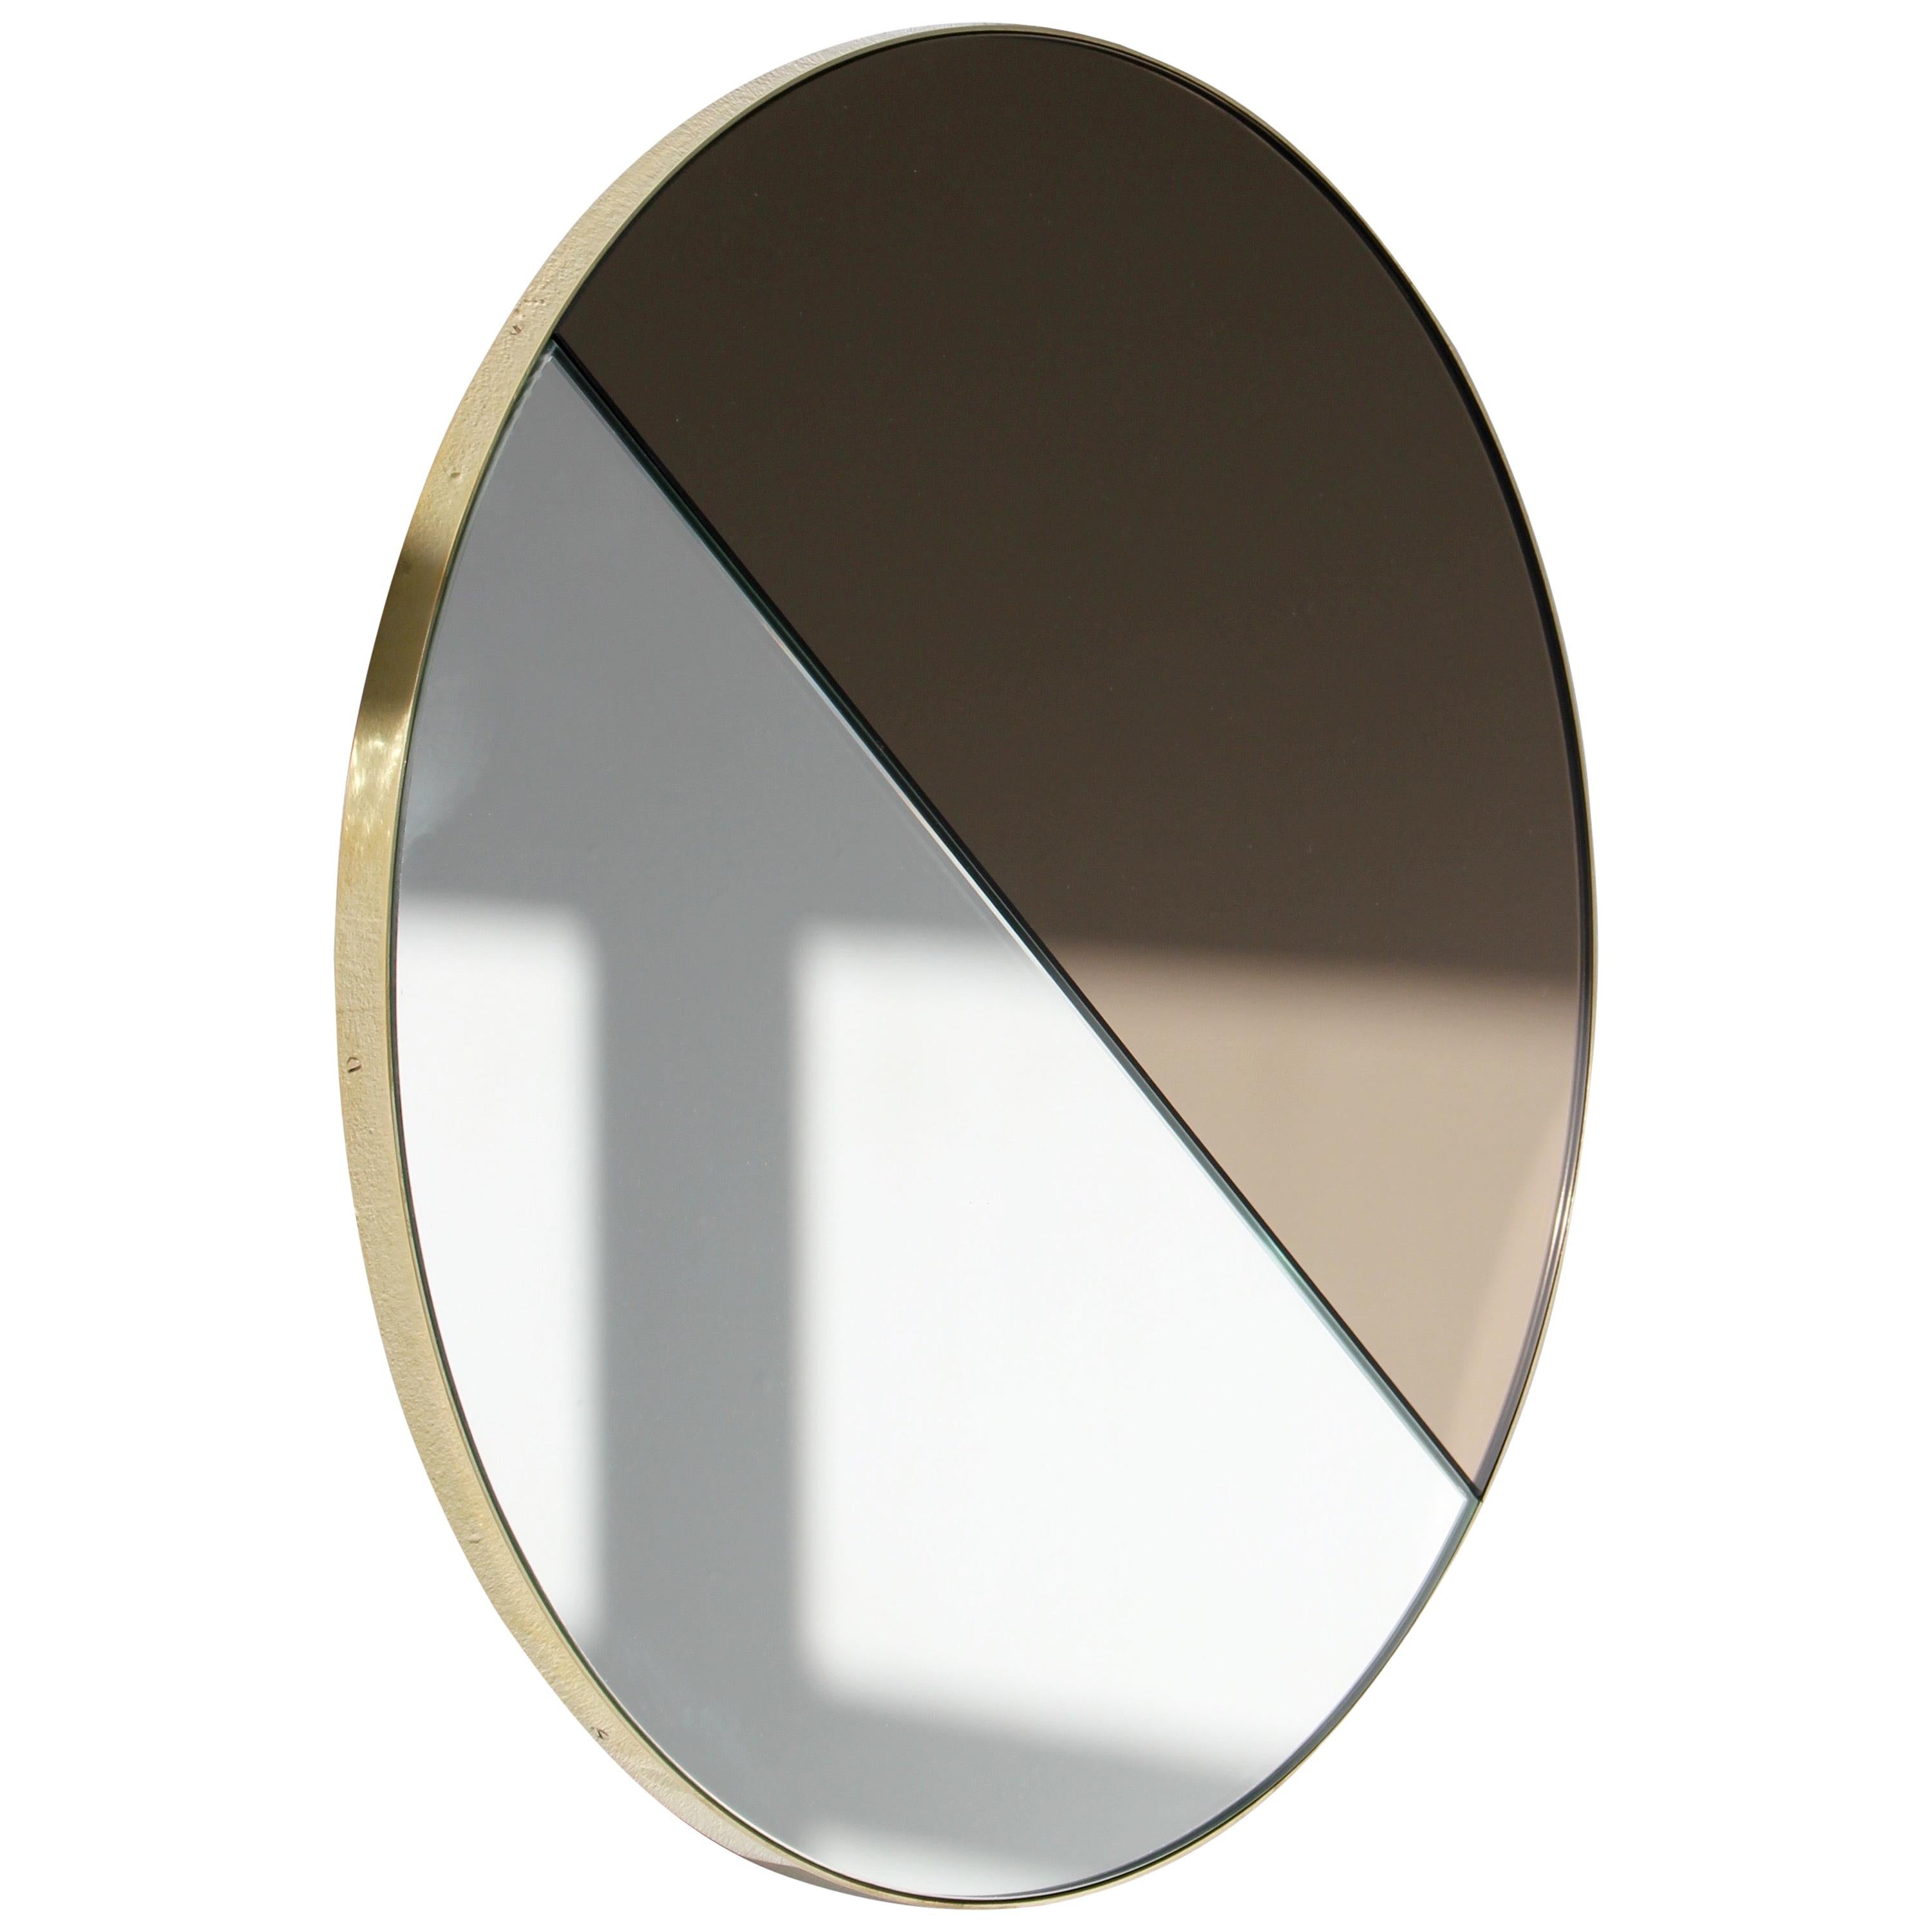 Orbis Dualis Mixed Silver and Bronze Round Mirror with Brass Frame, Large